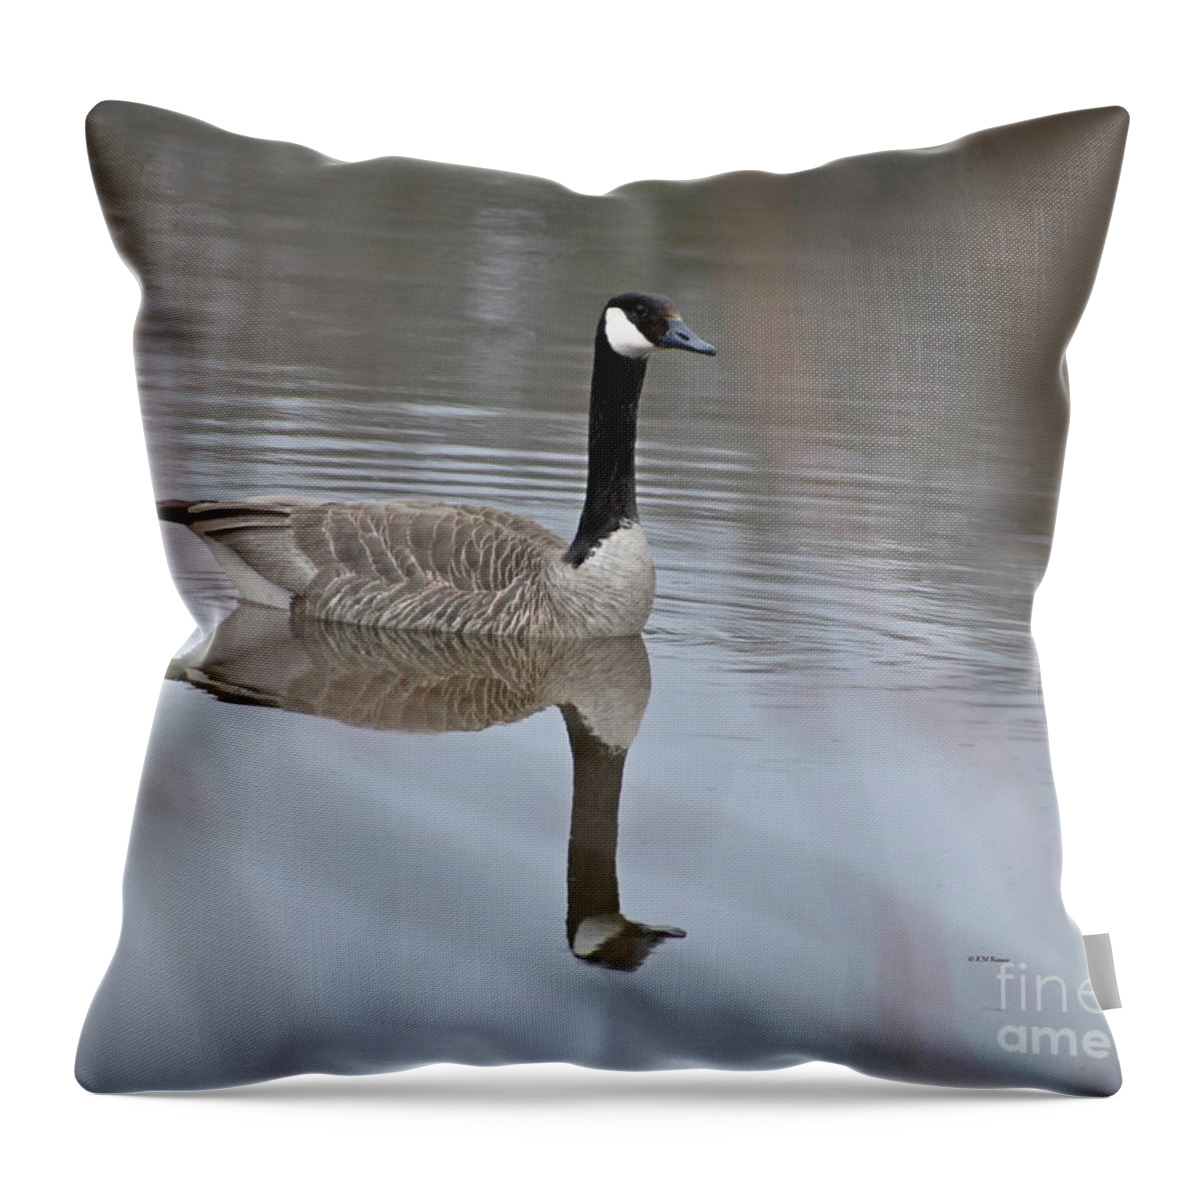 Through The Trees Throw Pillow featuring the photograph Through The Trees by Kathy M Krause